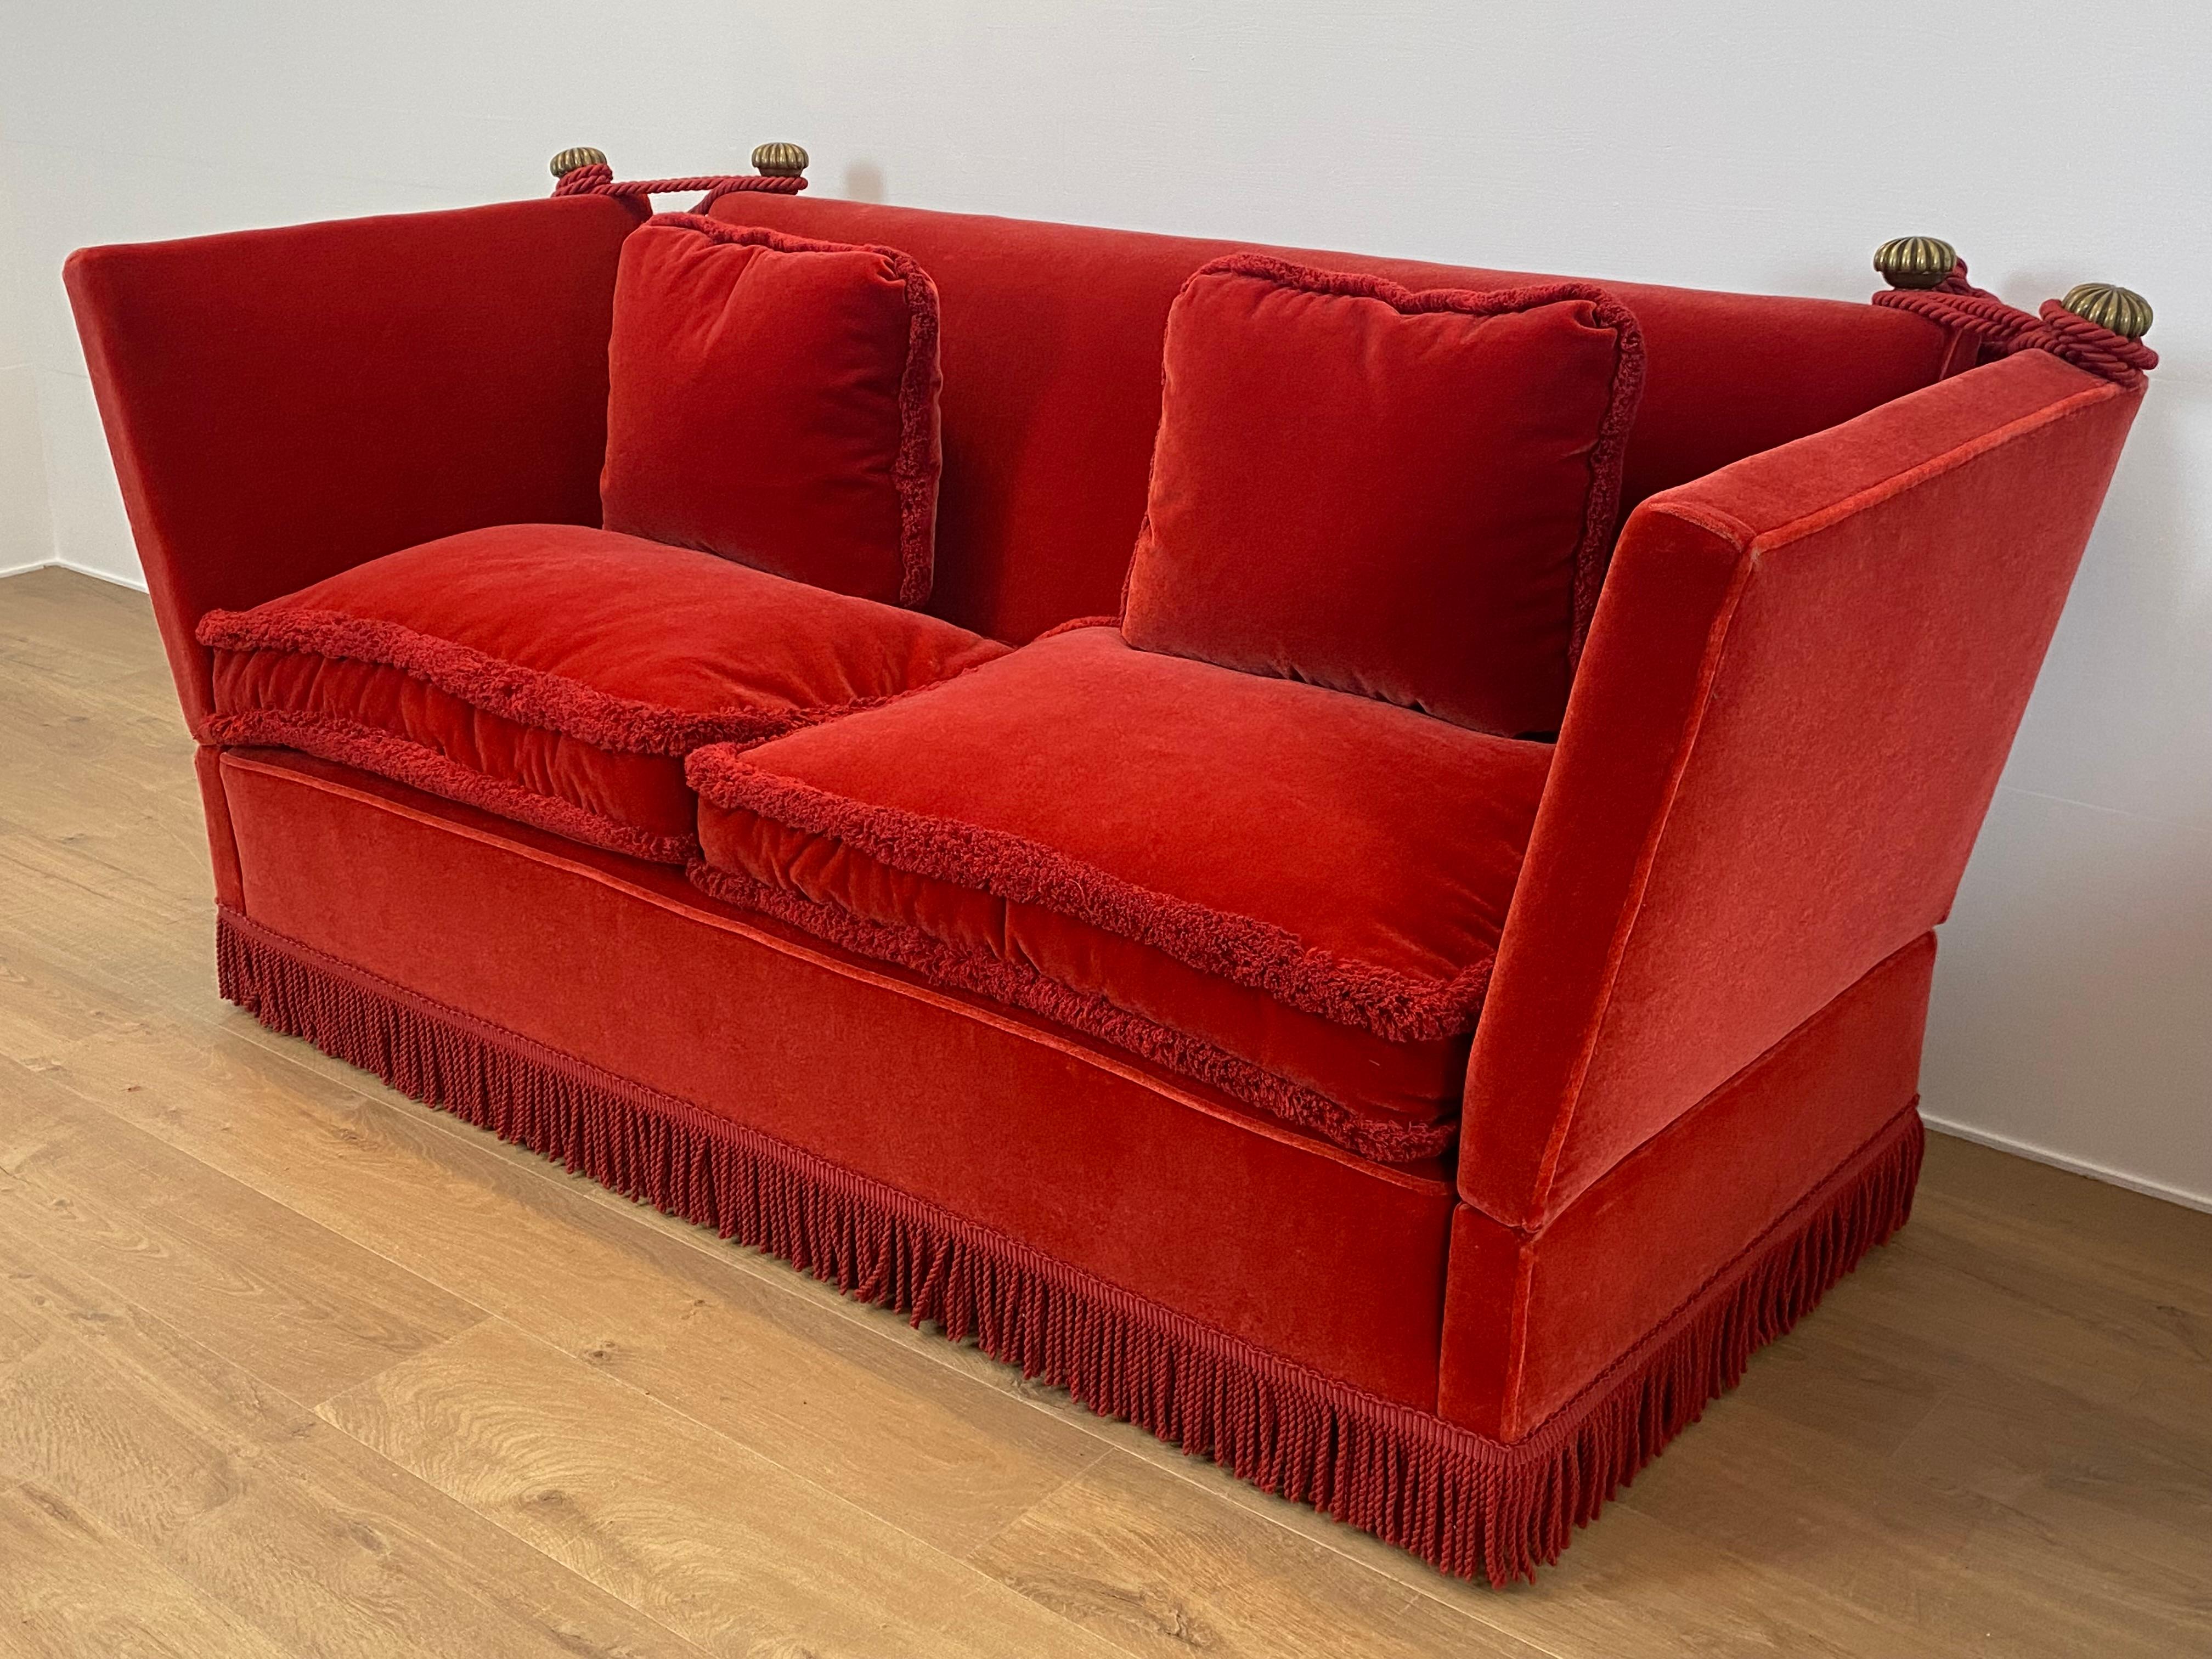 Dyed Drop Arm Knoll Style Sofa in an Orange-Red Velvet For Sale